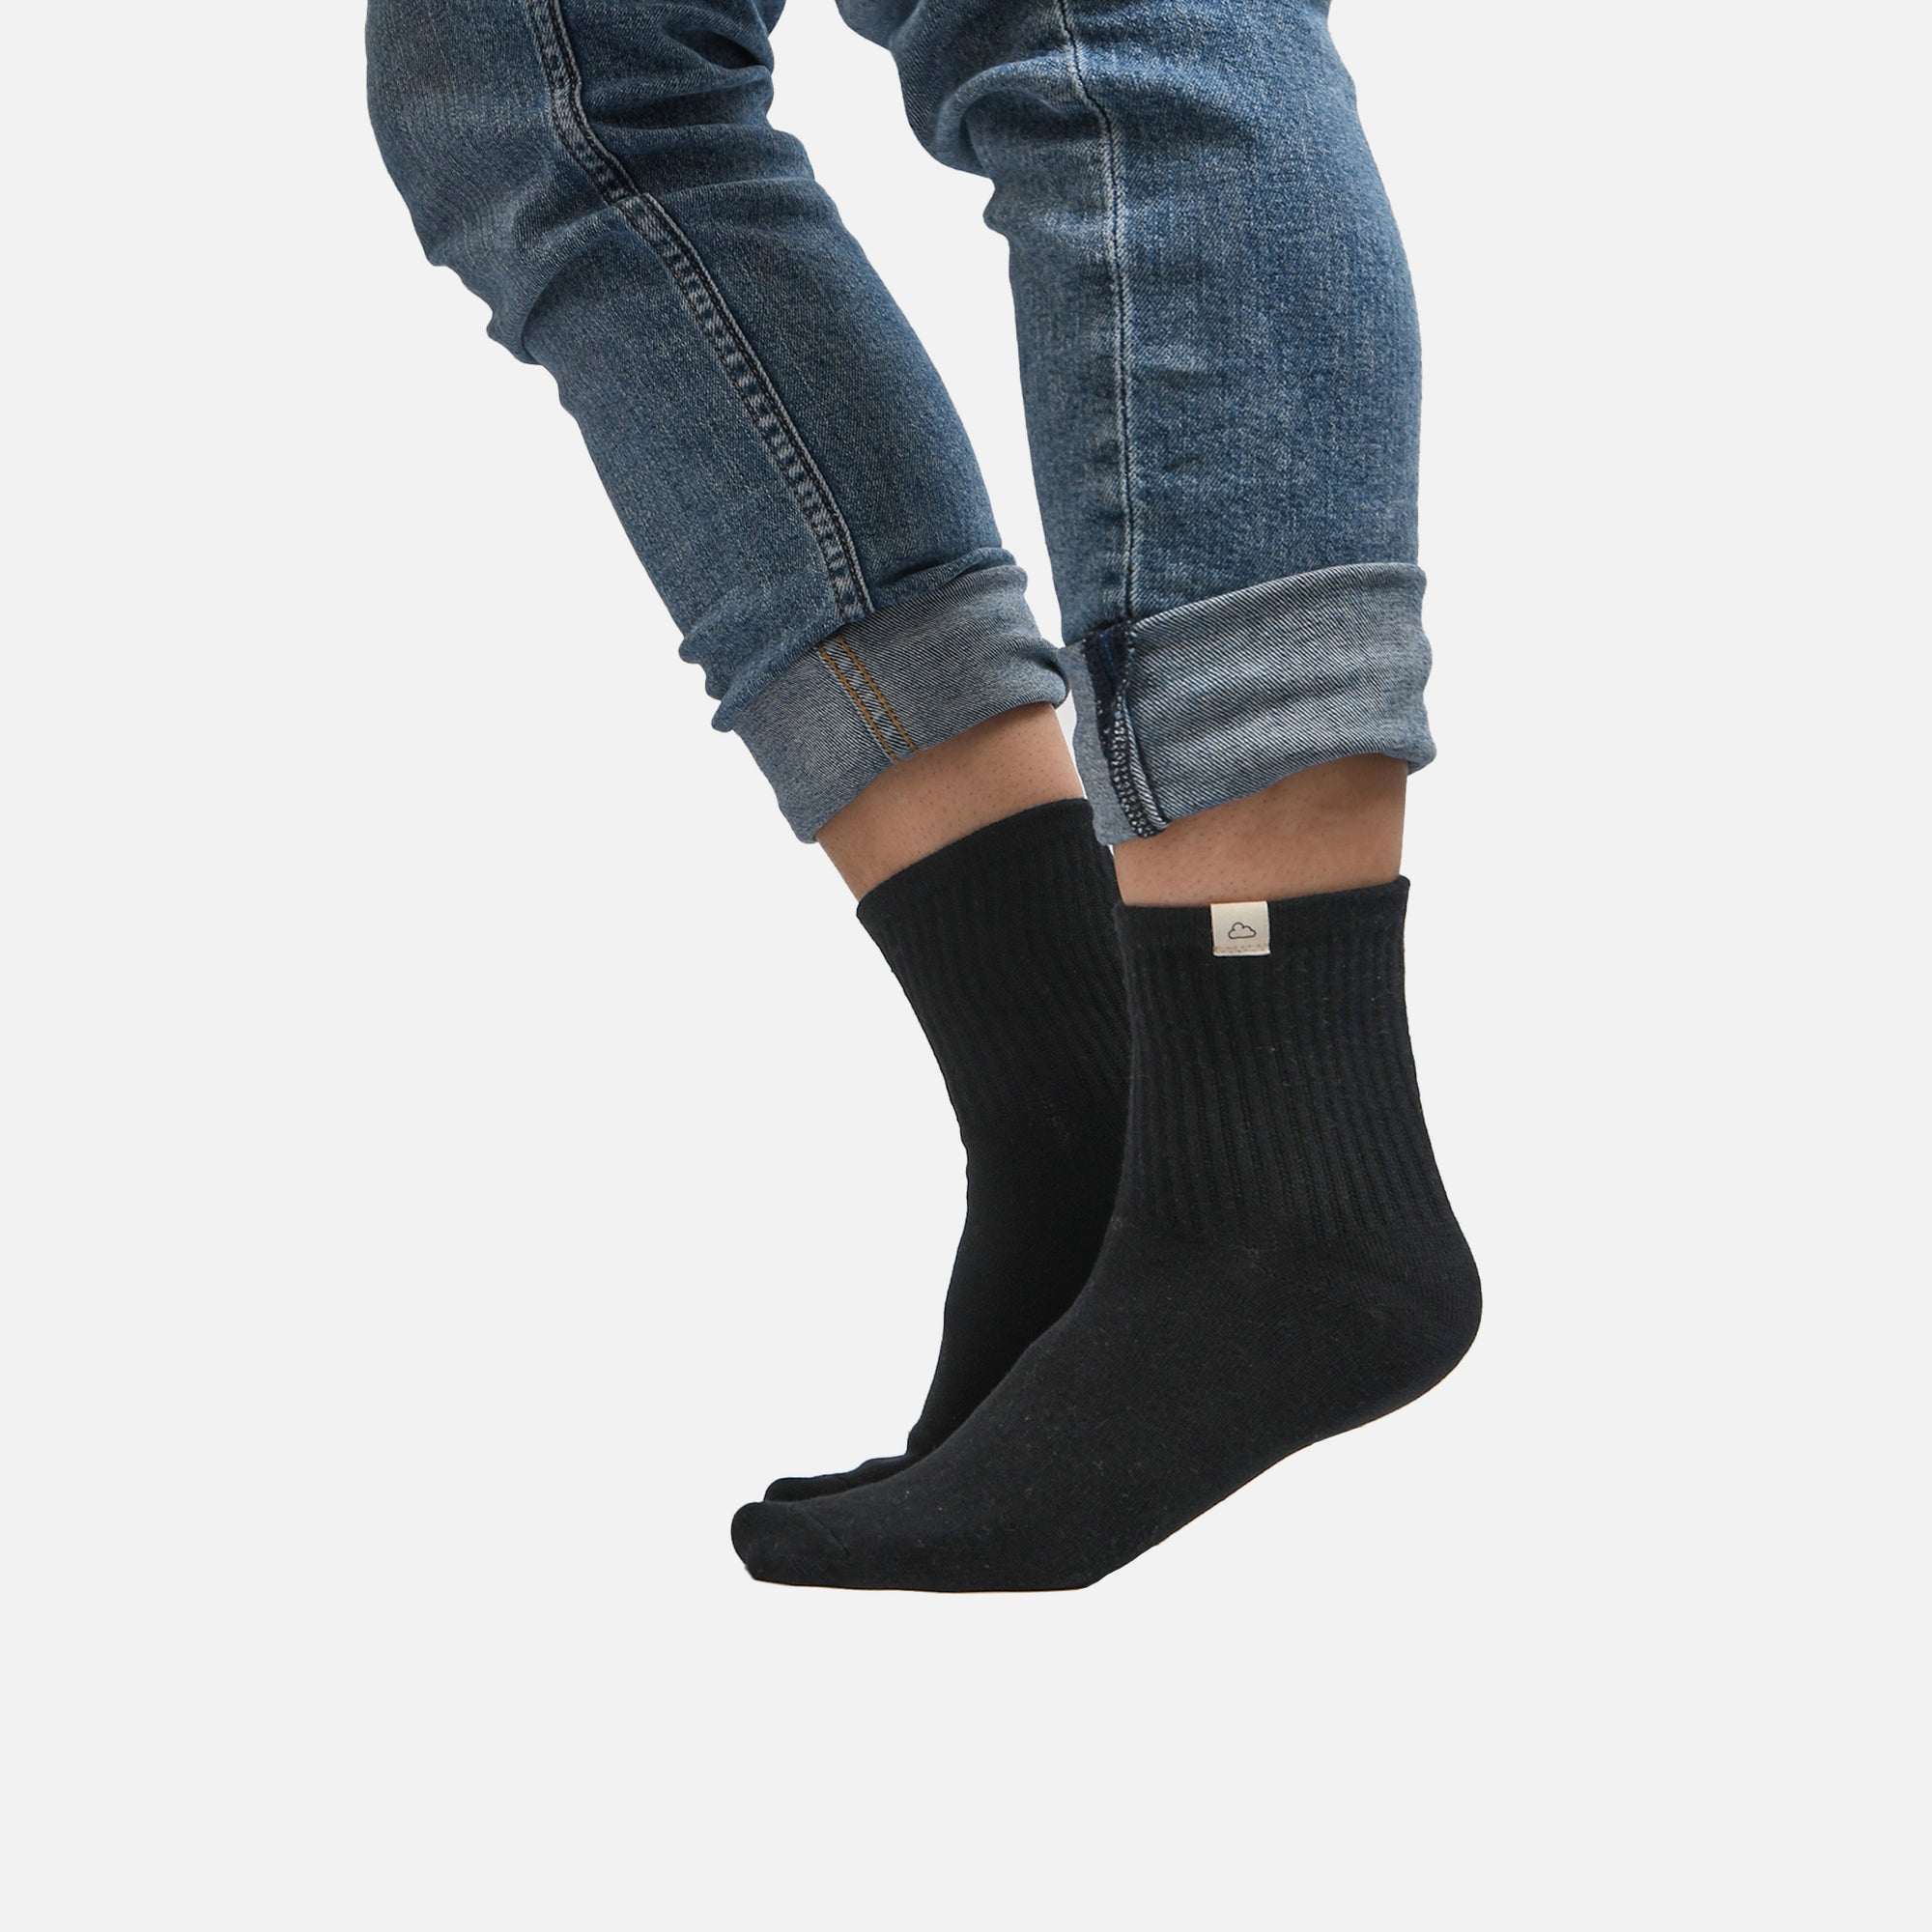 Black ankle socks with cloud label